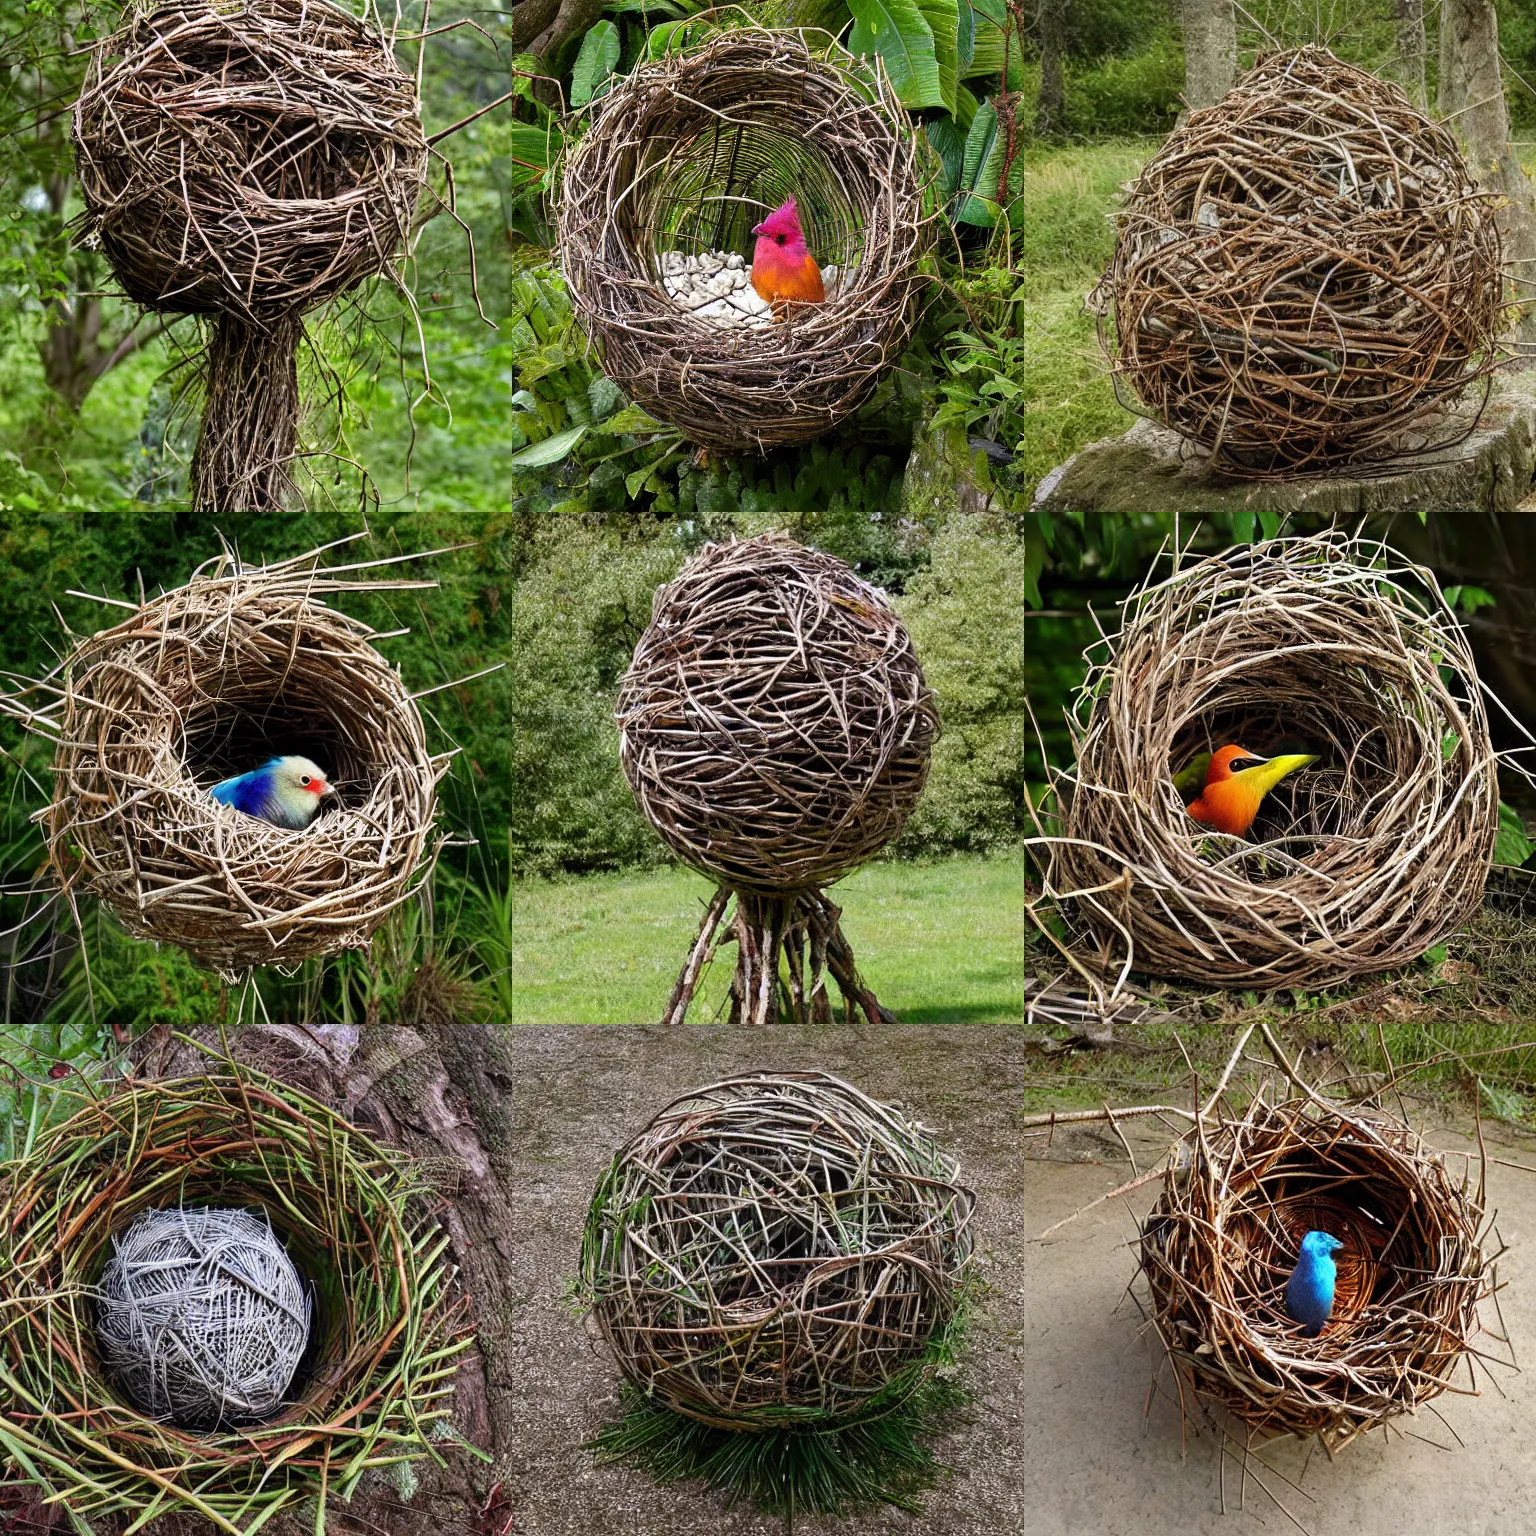 Prompt: exotic bird nesting in an environment art sculpture by Nils-Udo, leaves twigs wood, nature, natural, round form, Bird inside, leaves woven into structure, flowers surround